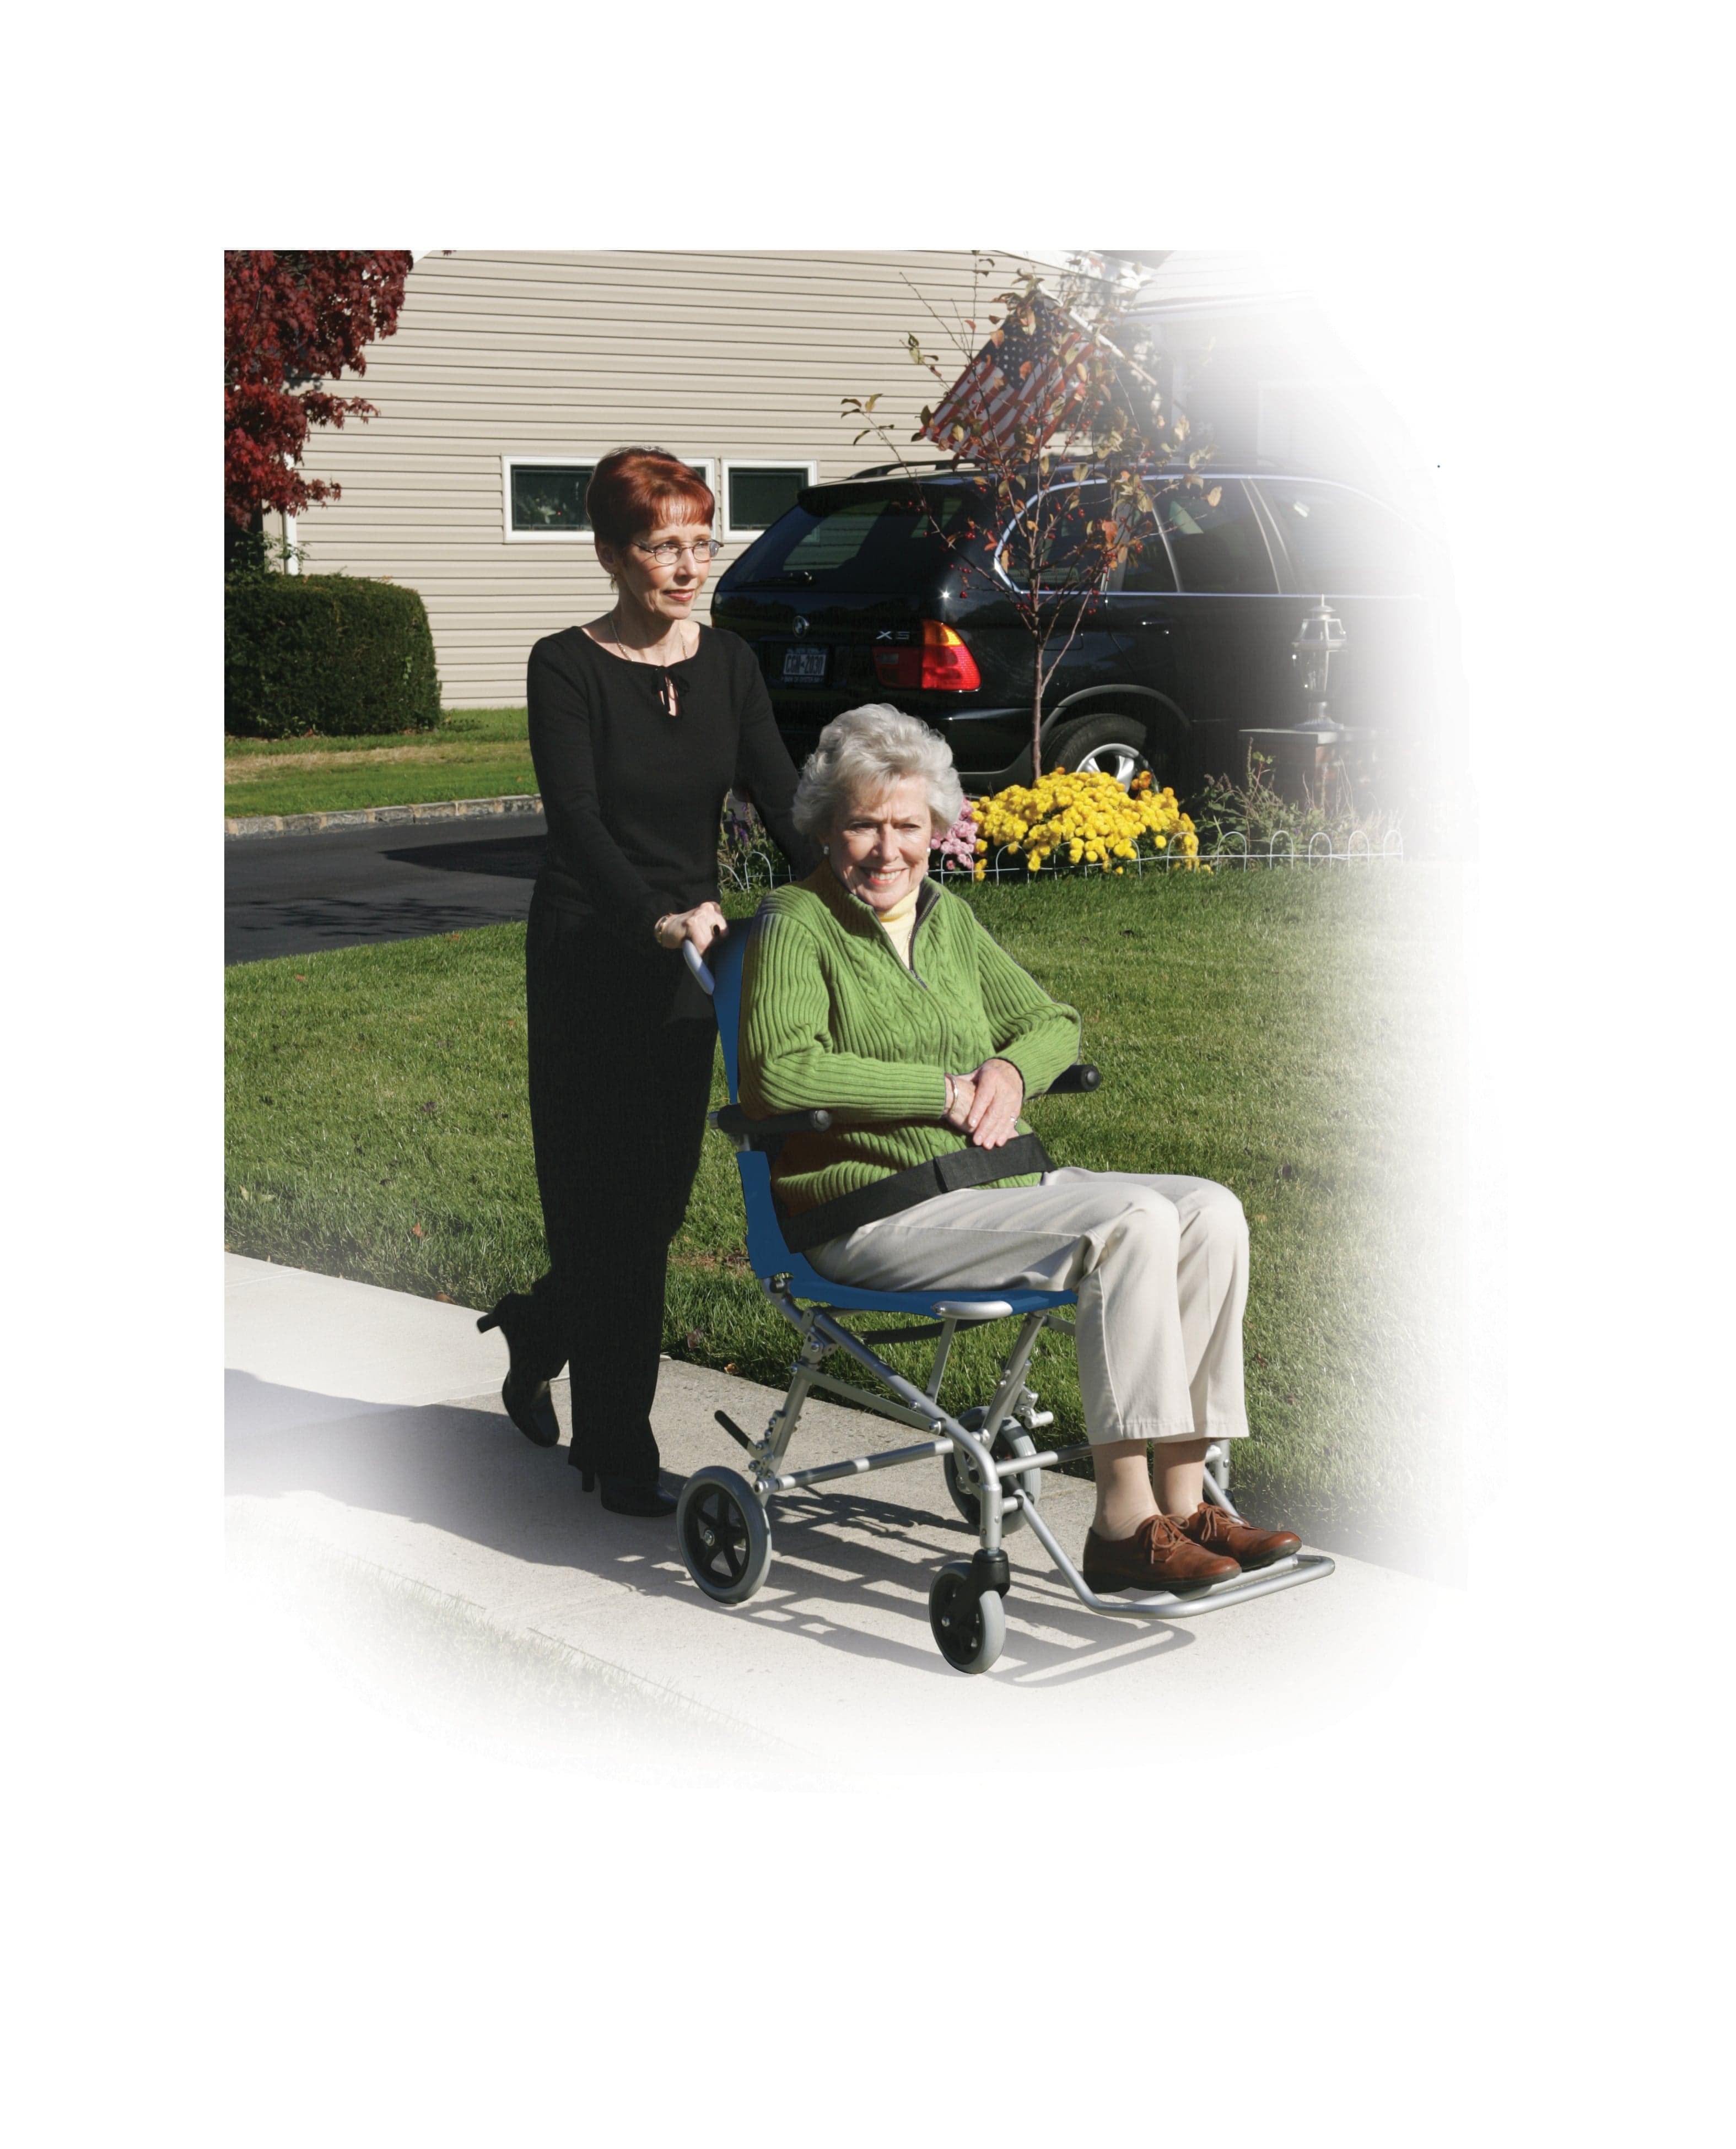 Drive Medical Transport Chairs Drive Medical Super Light Folding Transport Wheelchair with Carry Bag